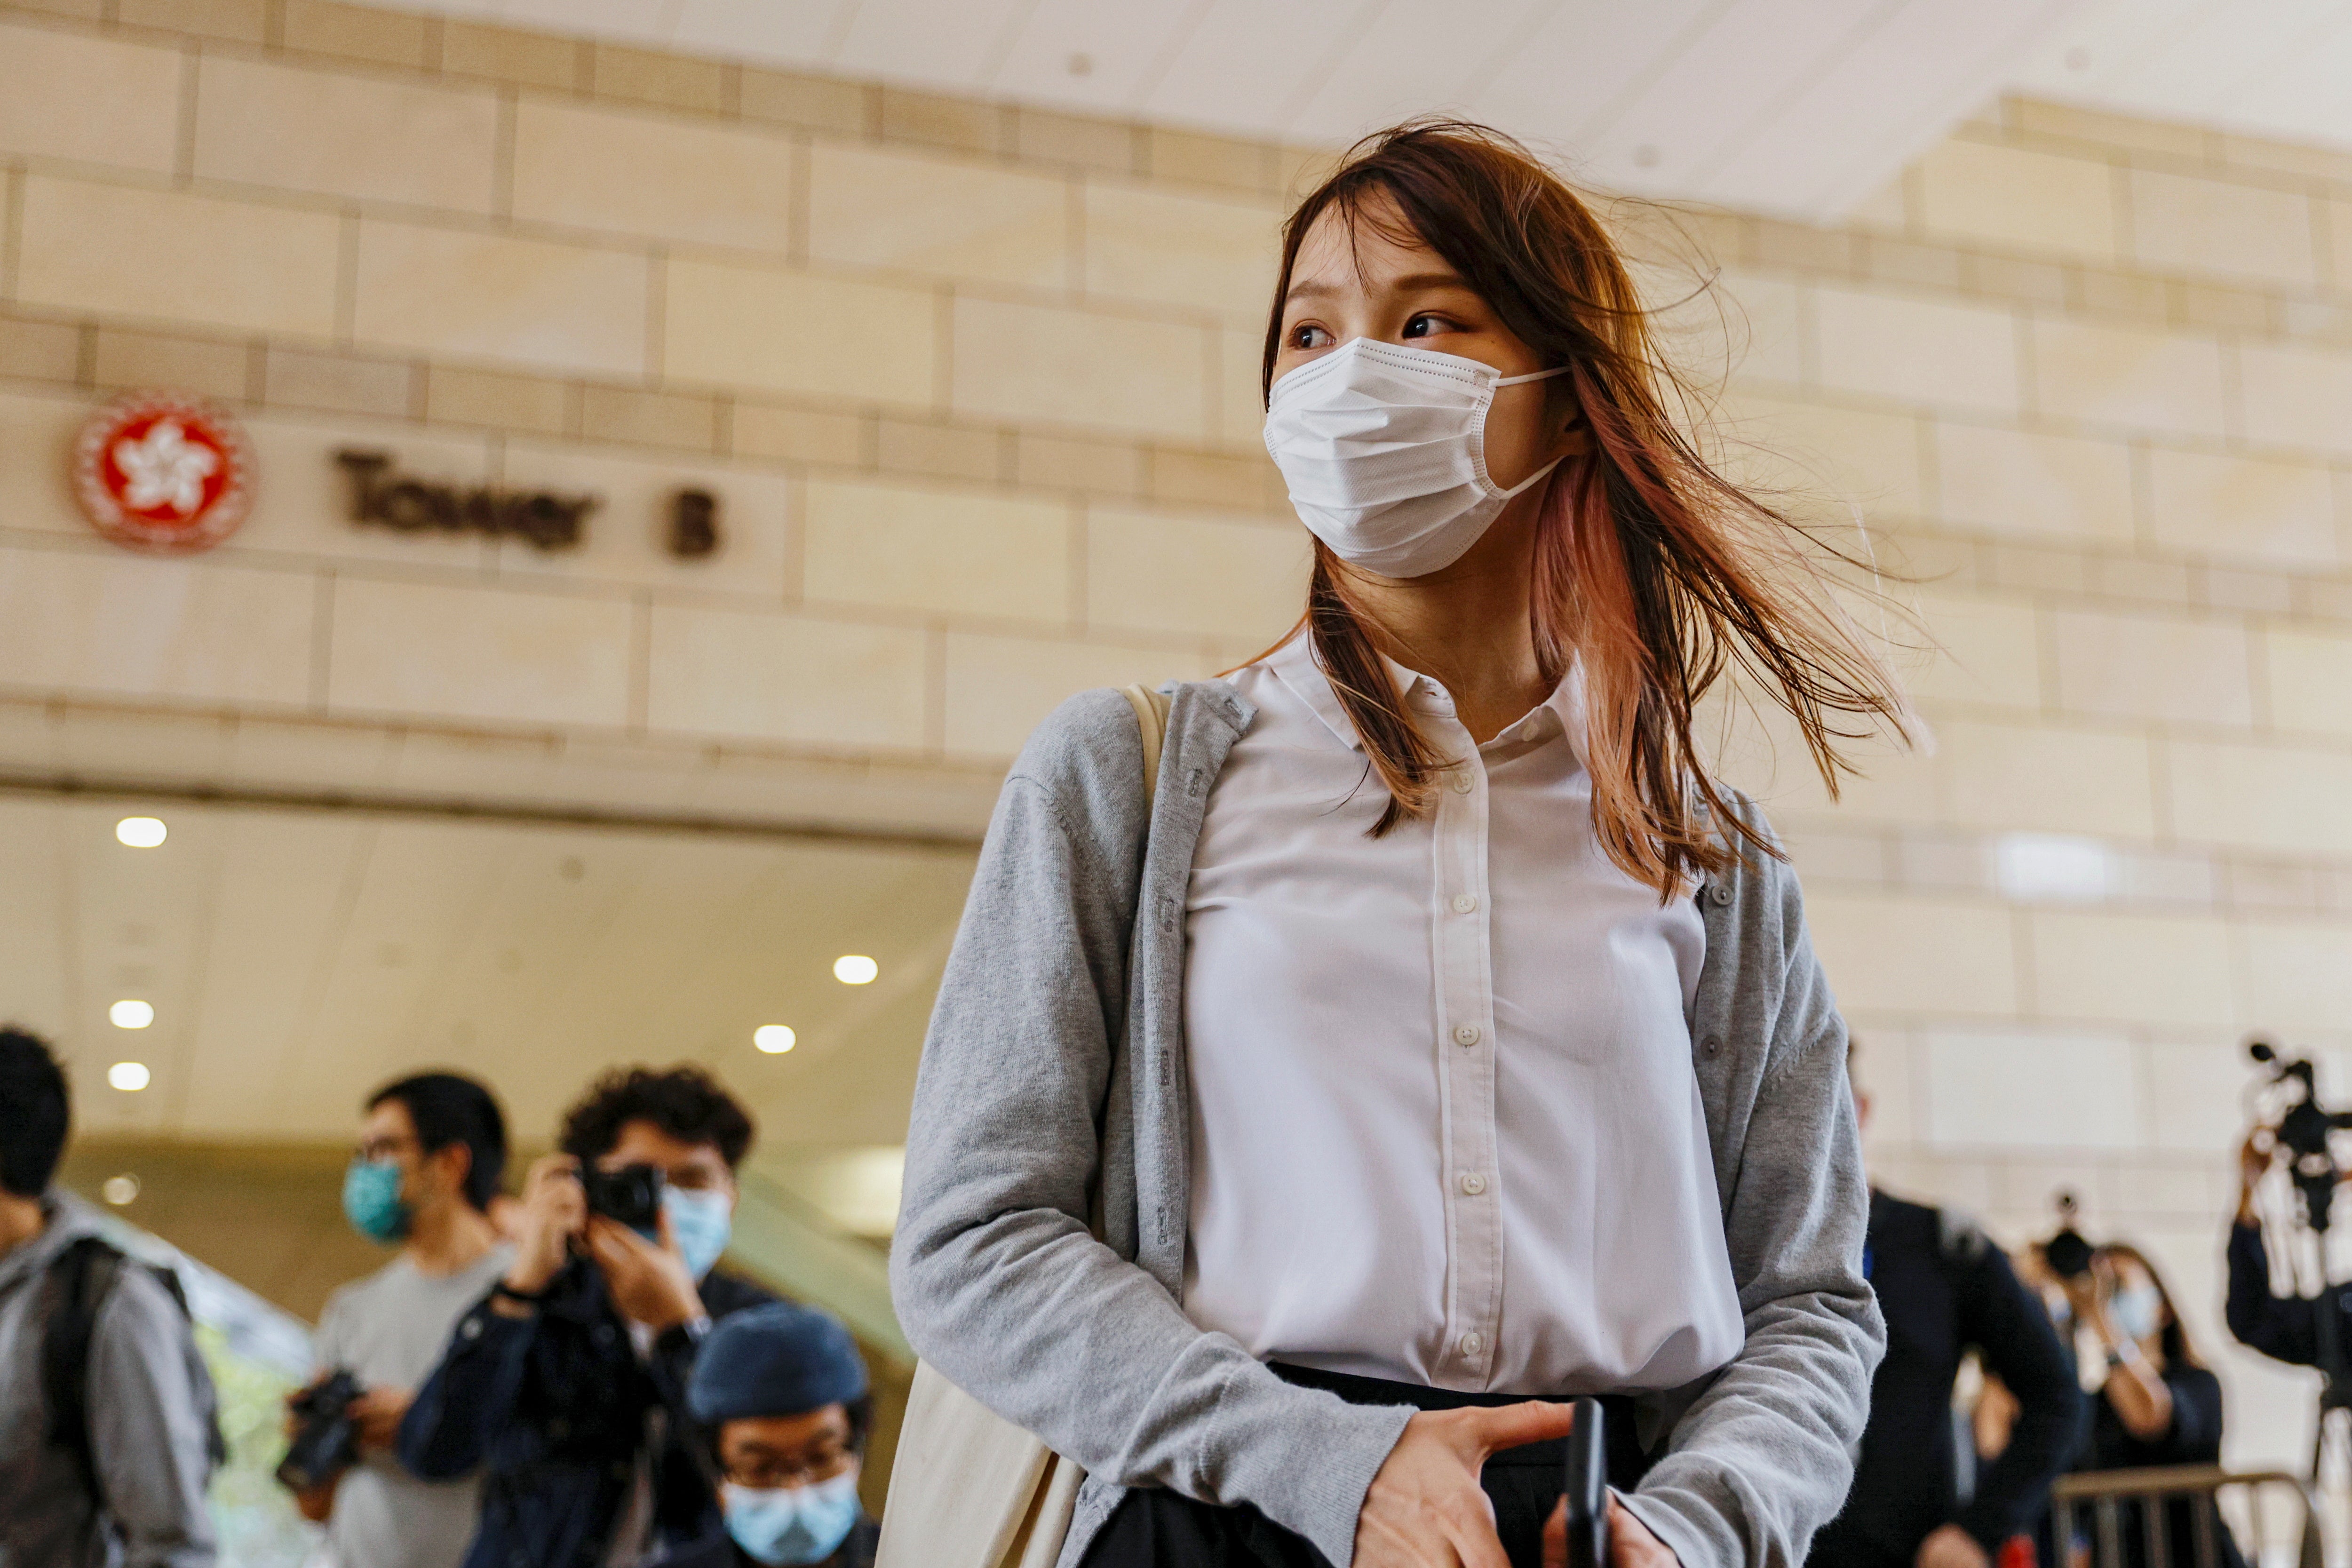 File: Pro-democracy activist Agnes Chow arrives at the West Kowloon Magistrates’ Courts to face charges related to illegal assembly stemming from 2019, in Hong Kong